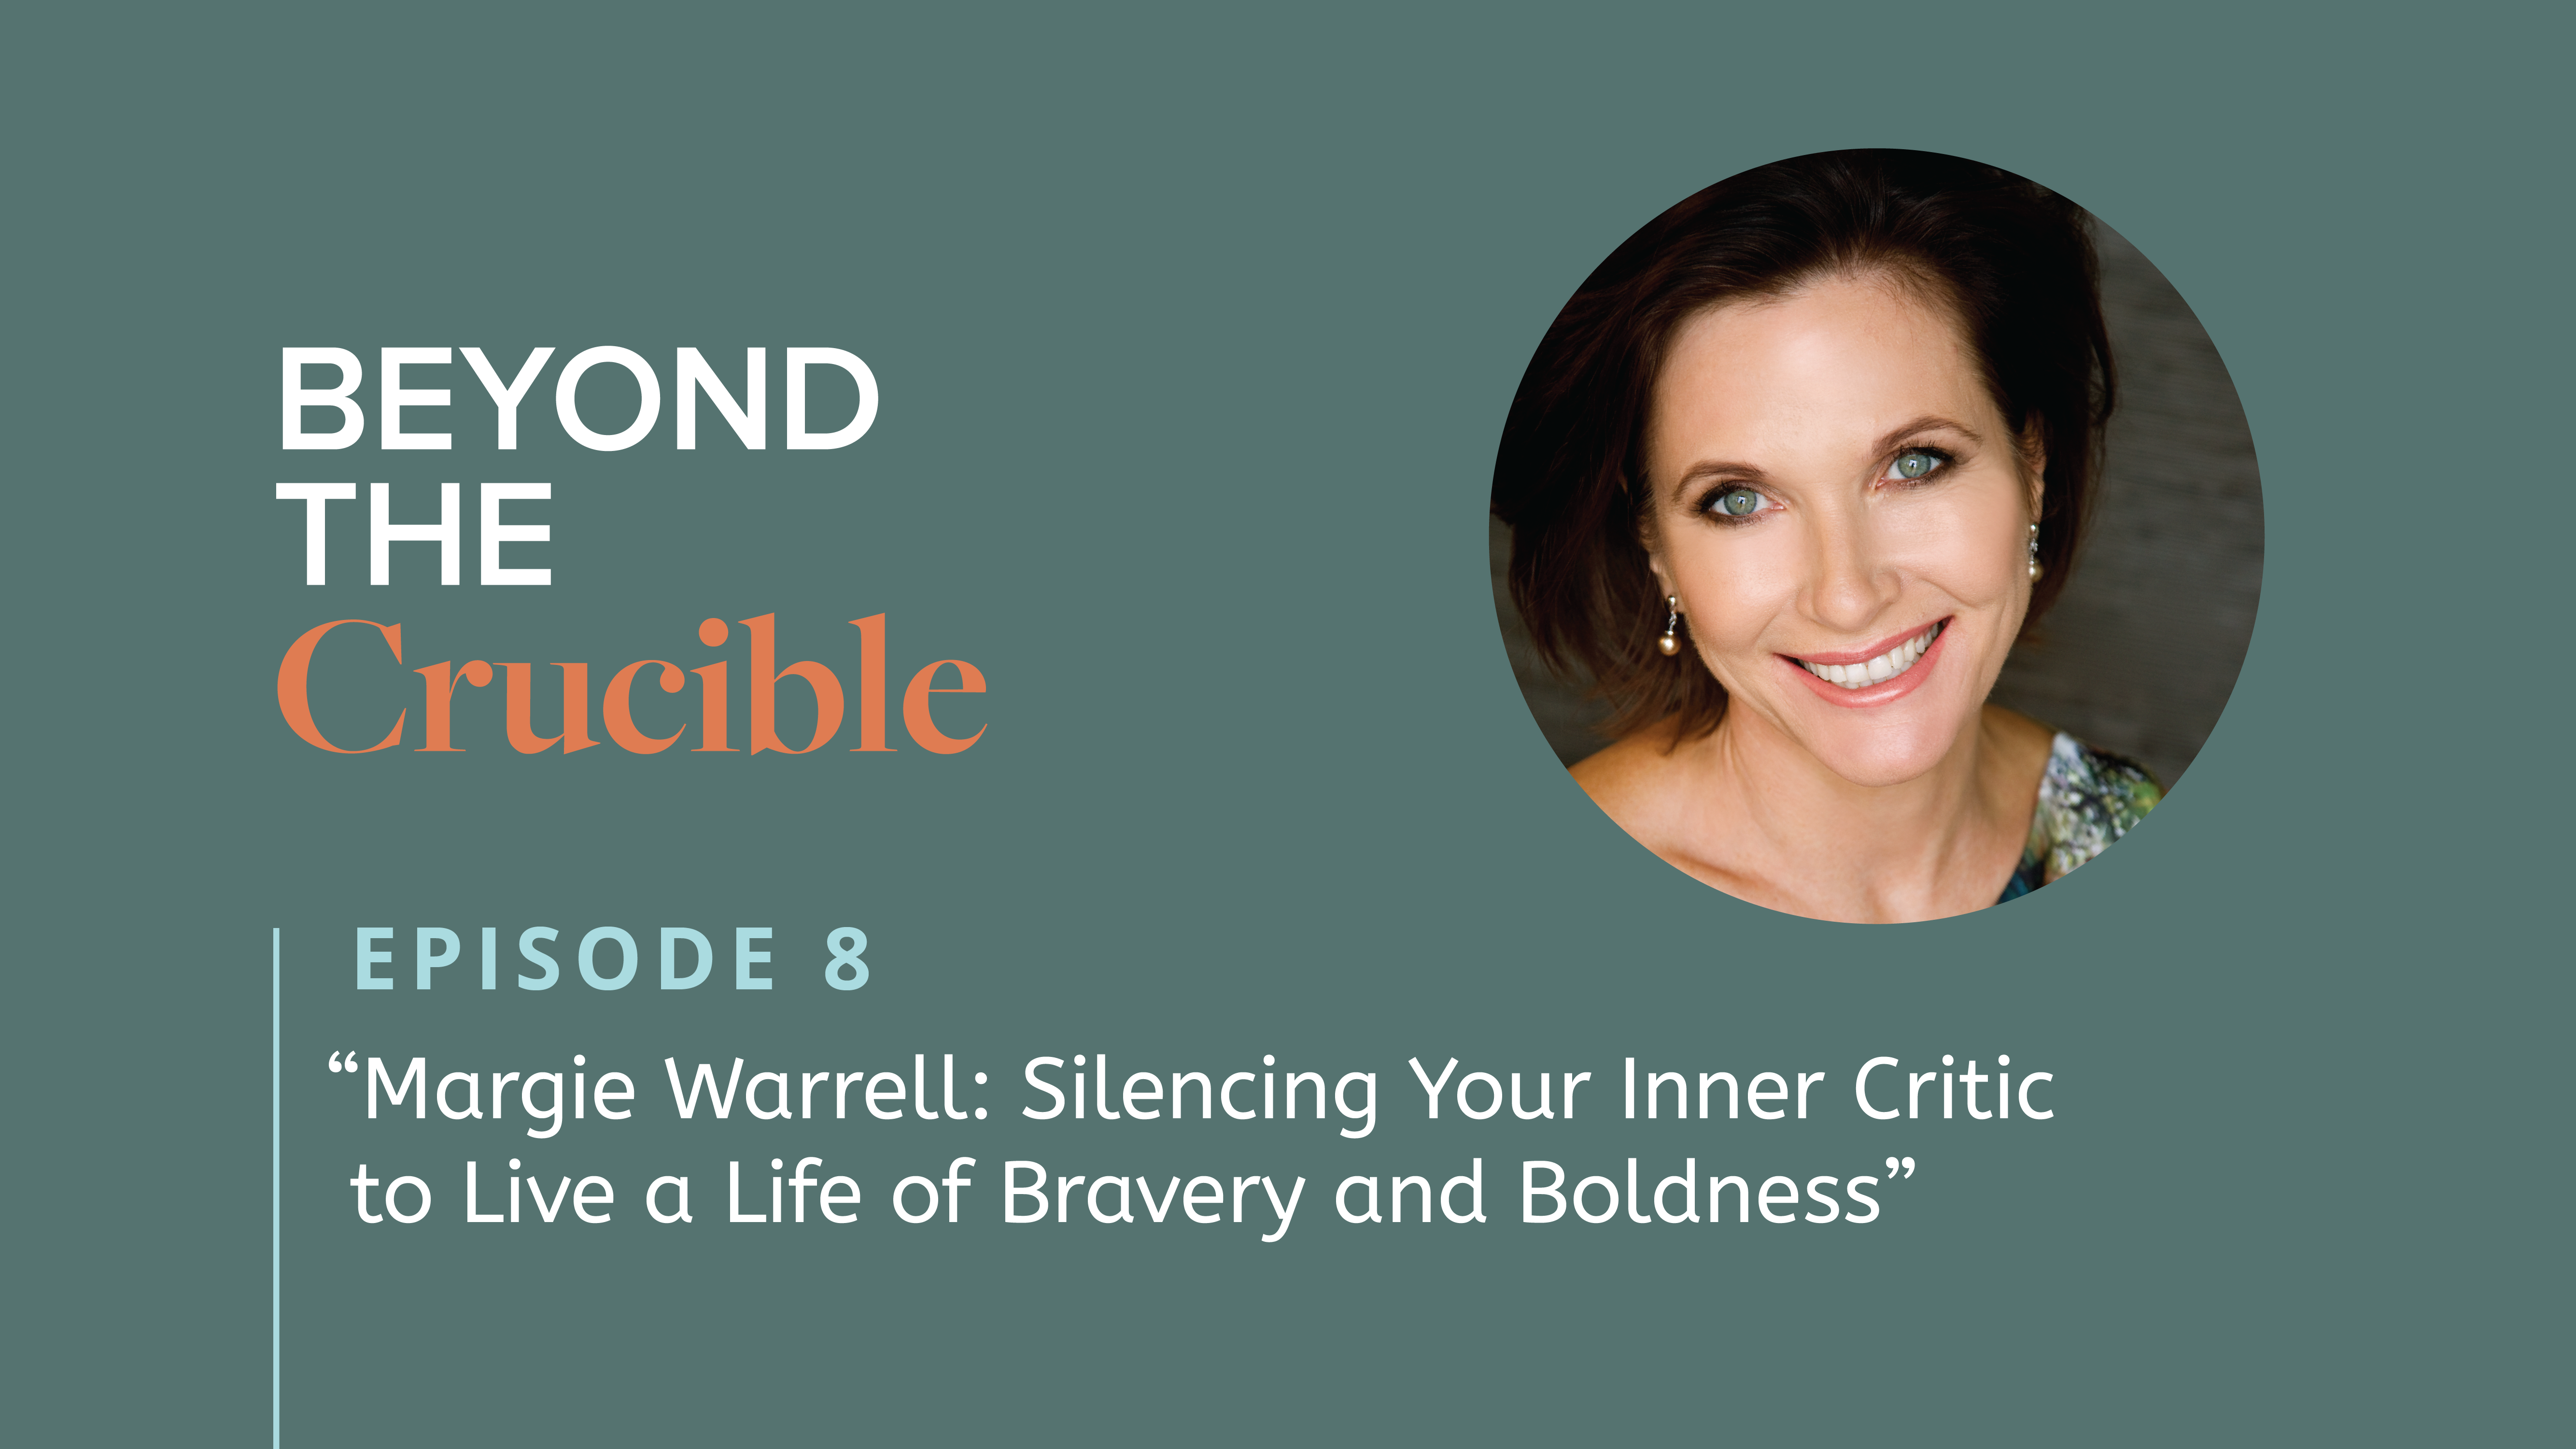 Margie Warrell: Silencing your inner critic to live a life of bravery and boldness